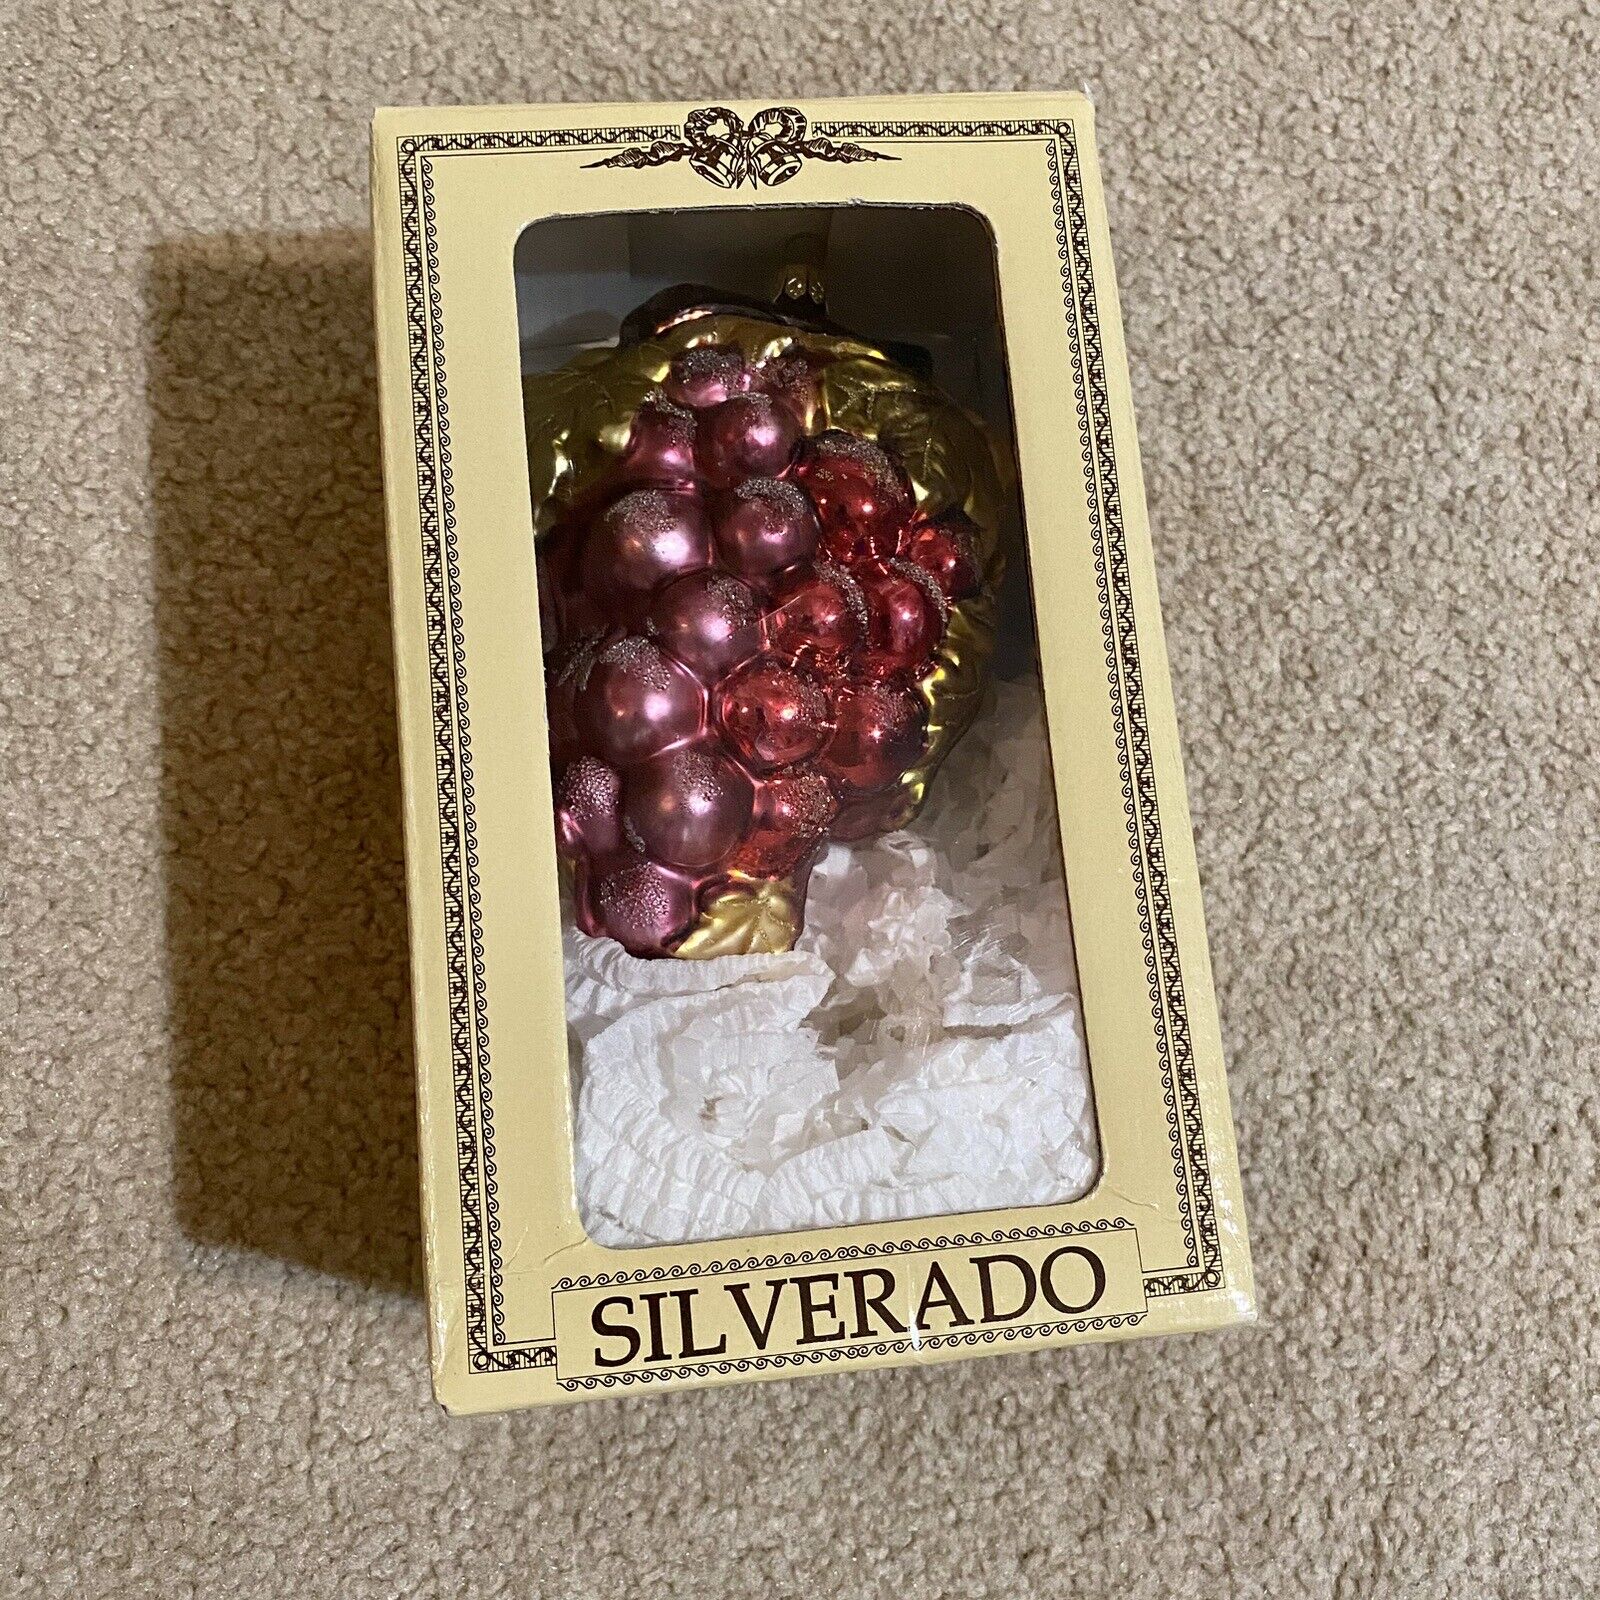 NEW Silverado Hand Crafted Grapes Glass Christmas Ornament Made In Poland